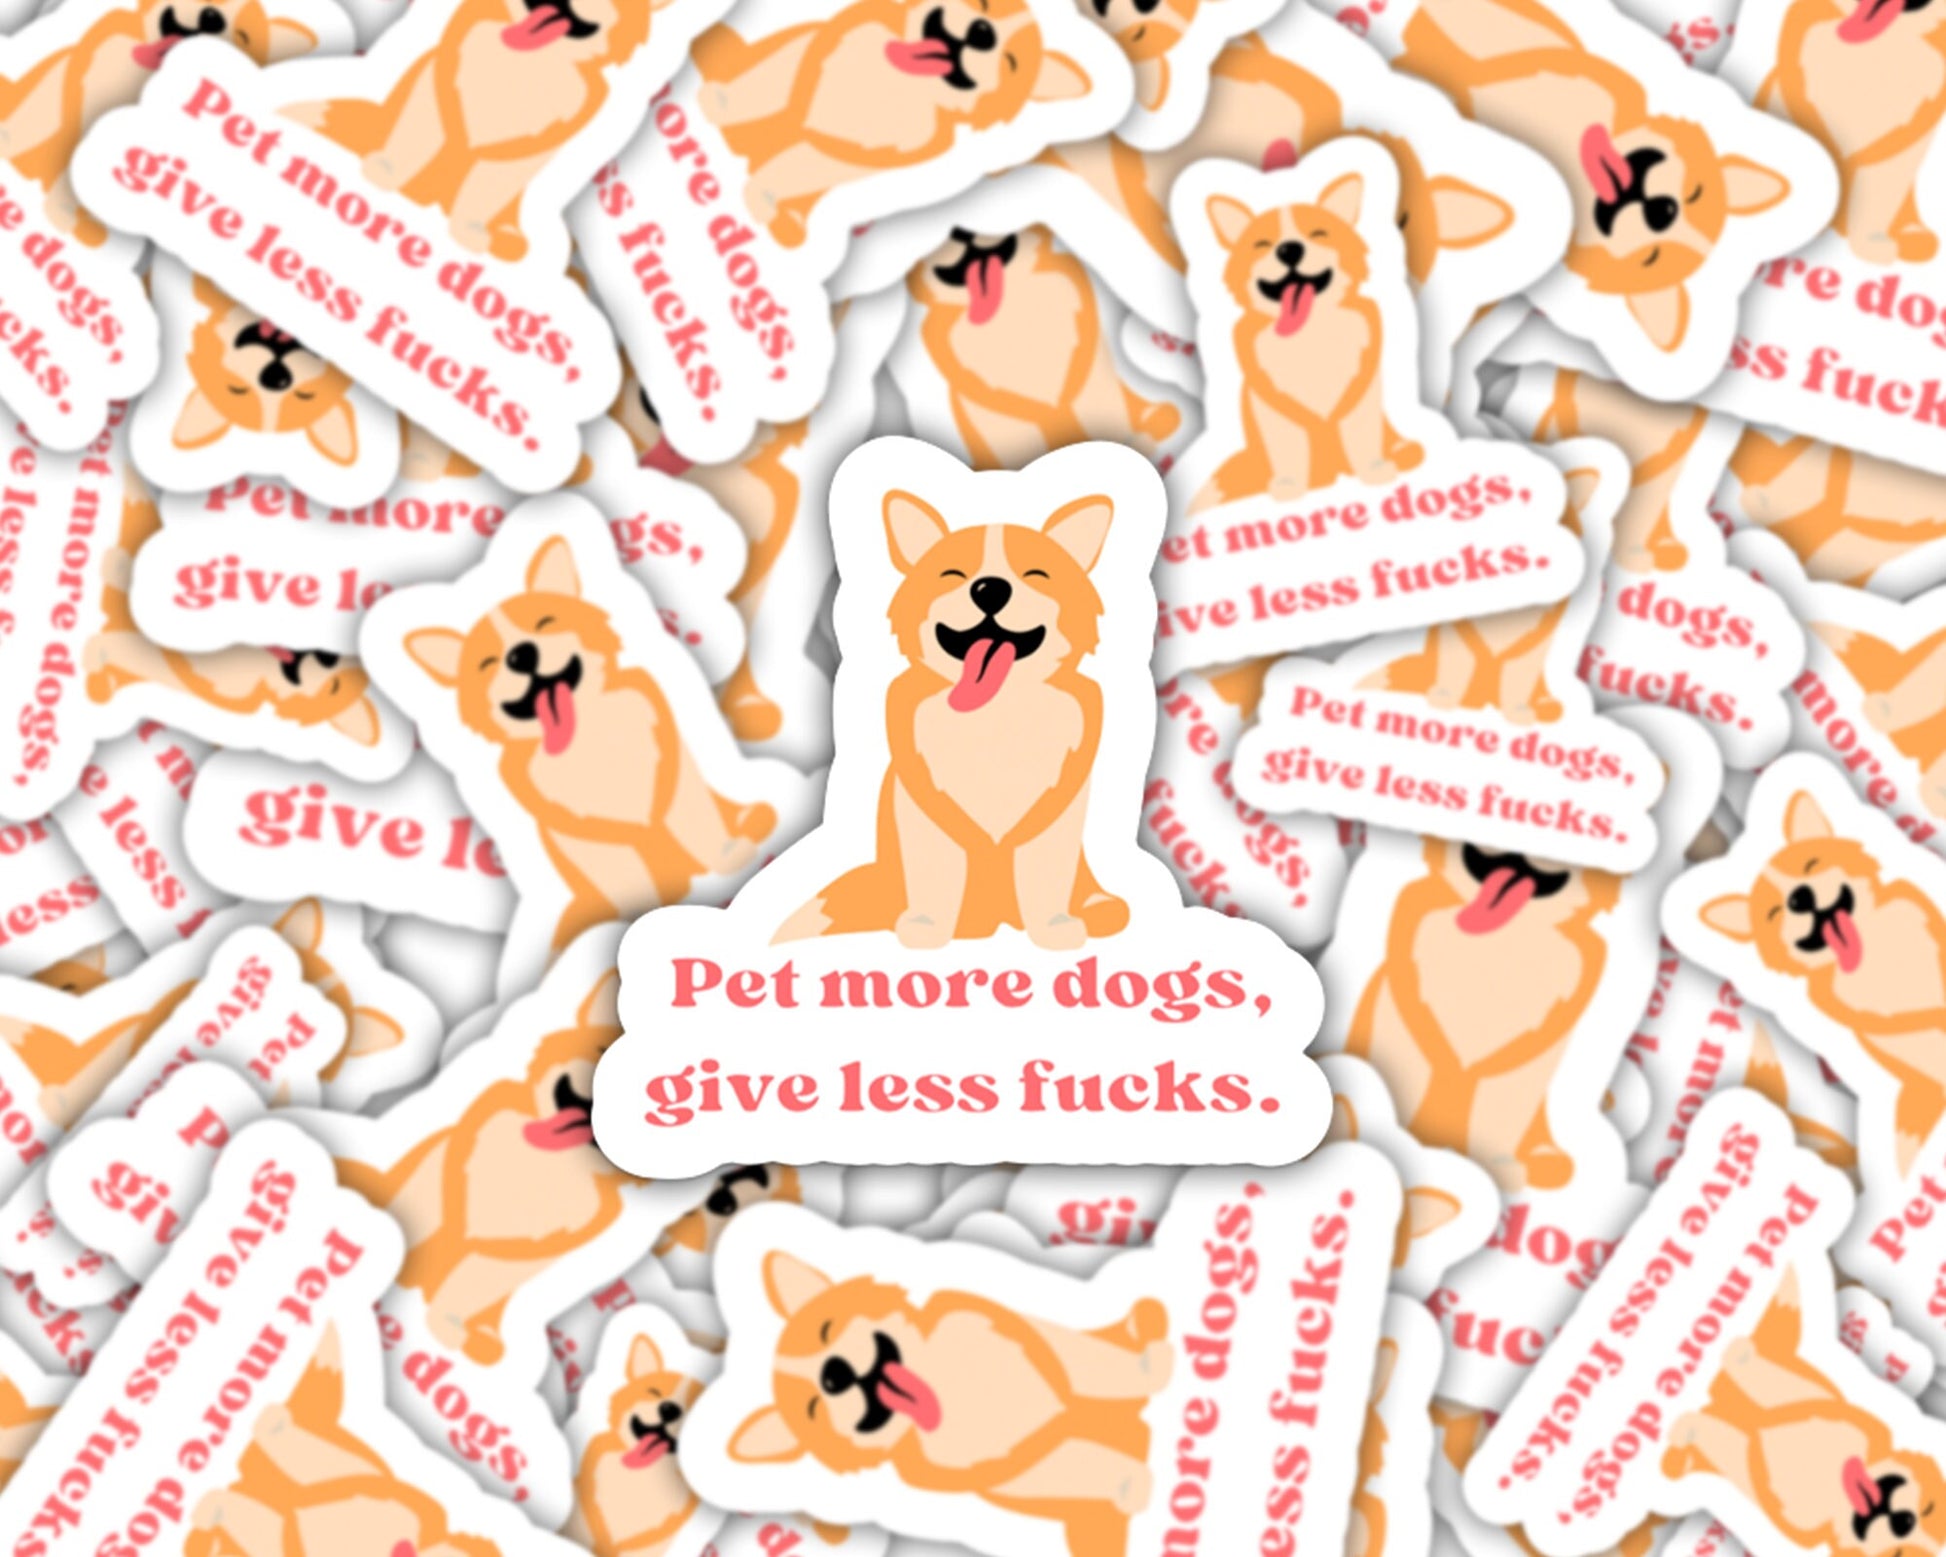 pet more dogs, give less fucks, dog stickers, dog lover gifts, pet shop stickers, dog mom, dogs over people, goldendoodle, husky sticker